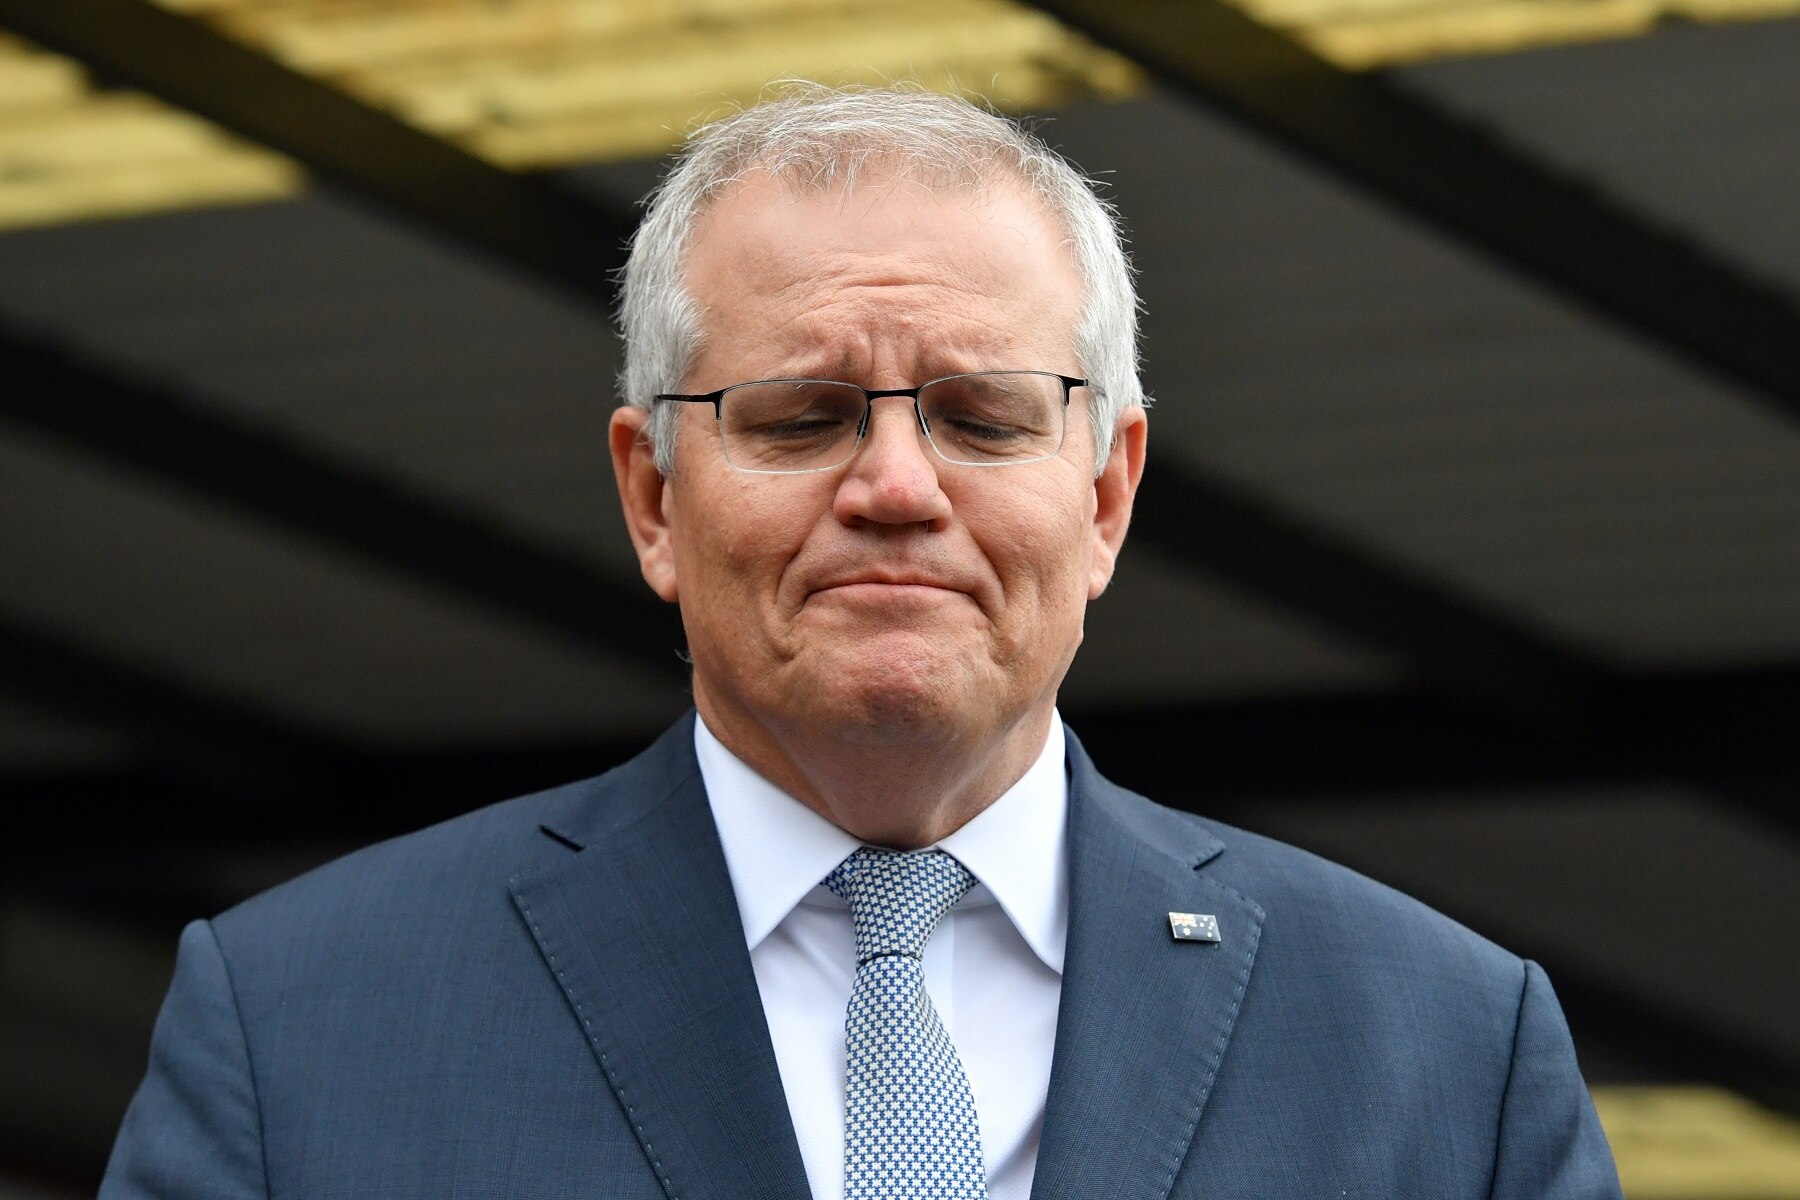 Scott Morrison has announced there will be no Australian diplomatic presence at the Beijing Olympics